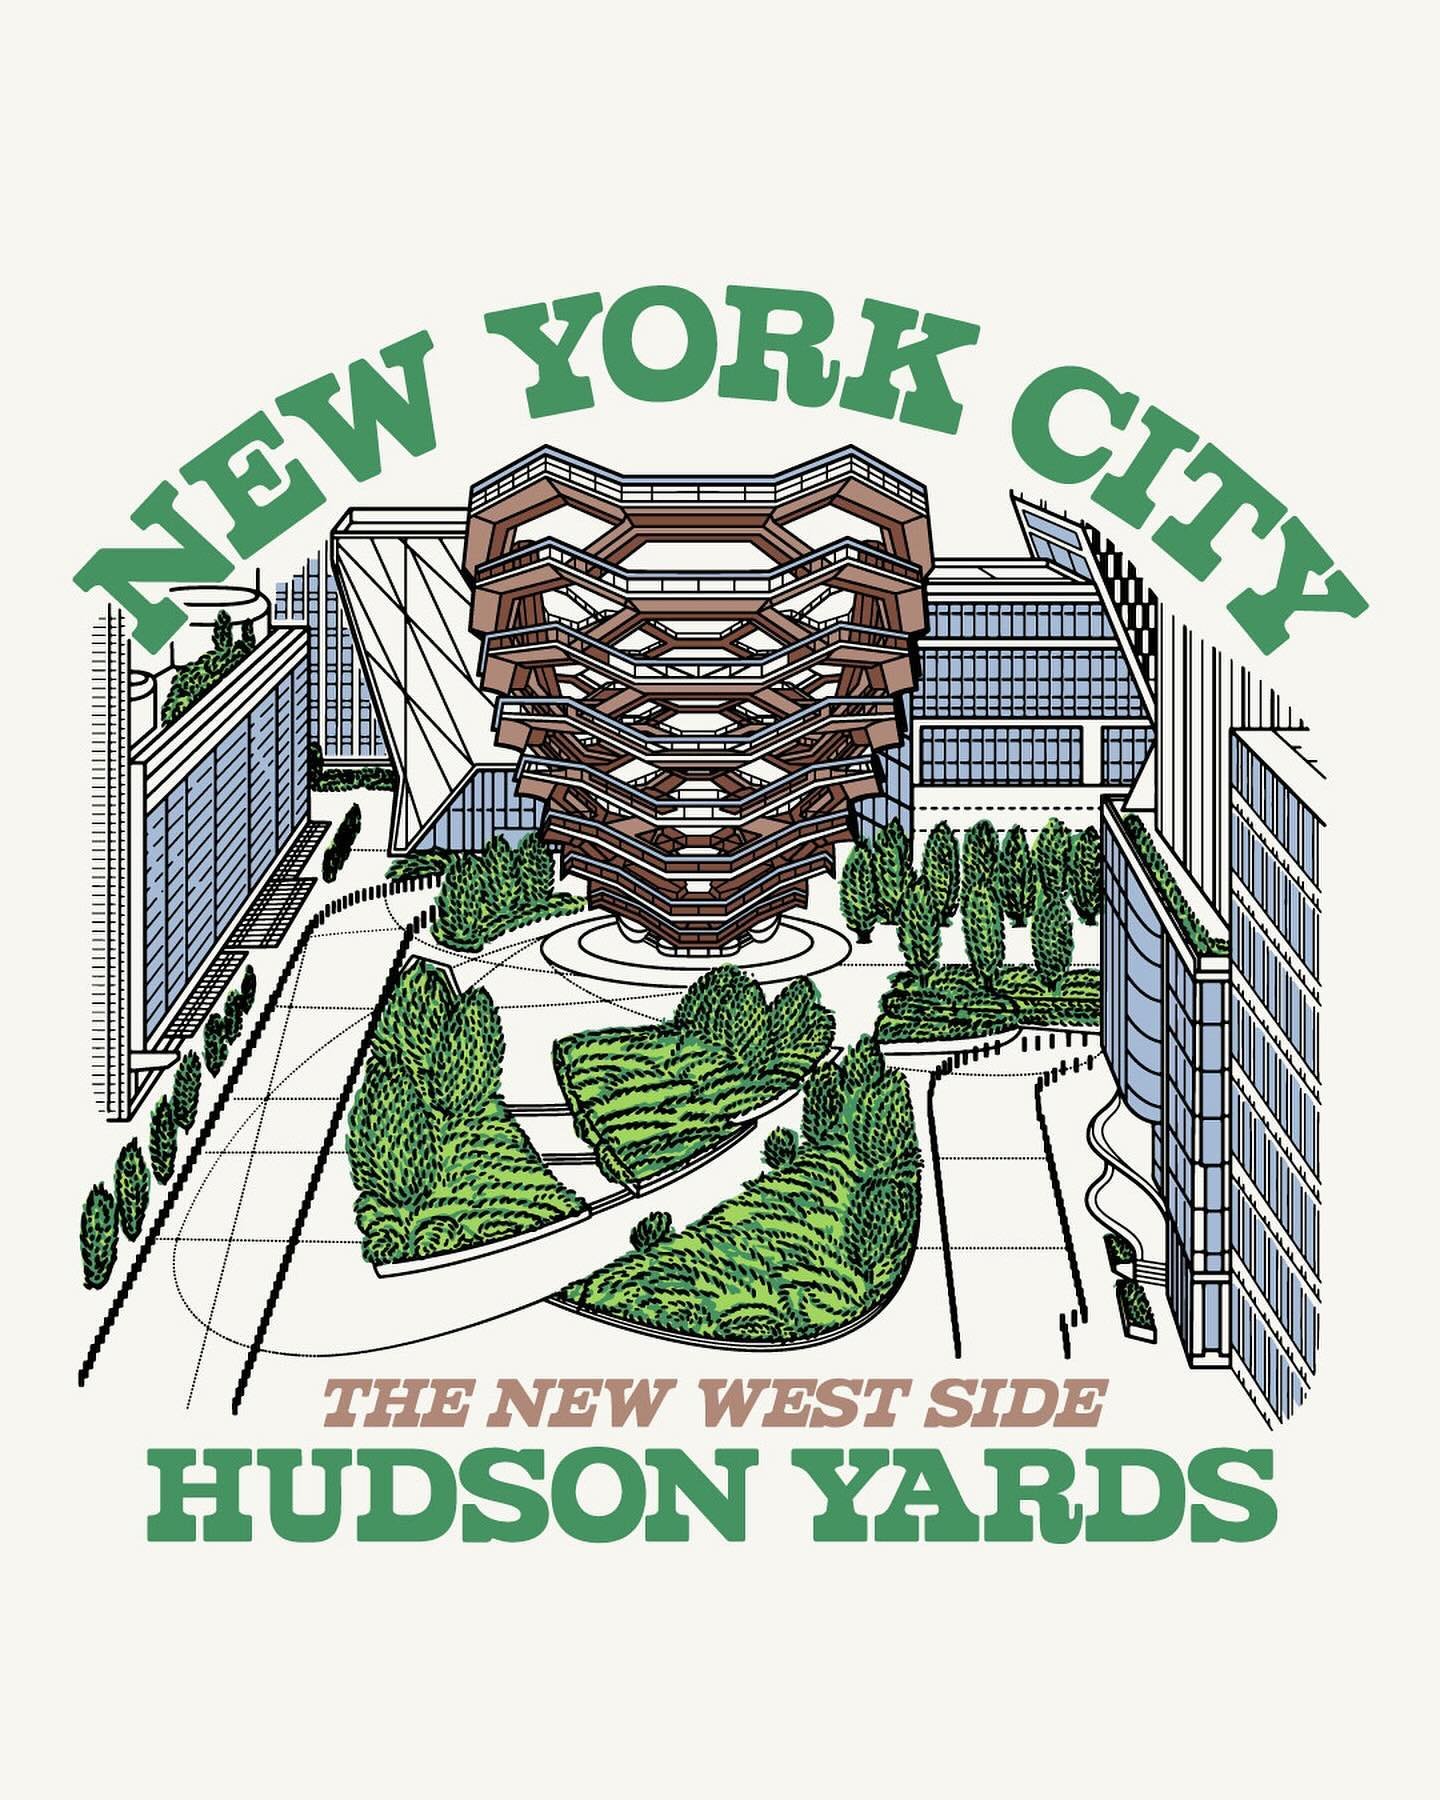 Recent work for @hudsonyards! These were so fun to make. If you&rsquo;re visiting NYC, be sure to stop by the @edgenyc gift shop and pickup something featuring these designs. Swipe to the end to see some of my initial sketches. Thanks!